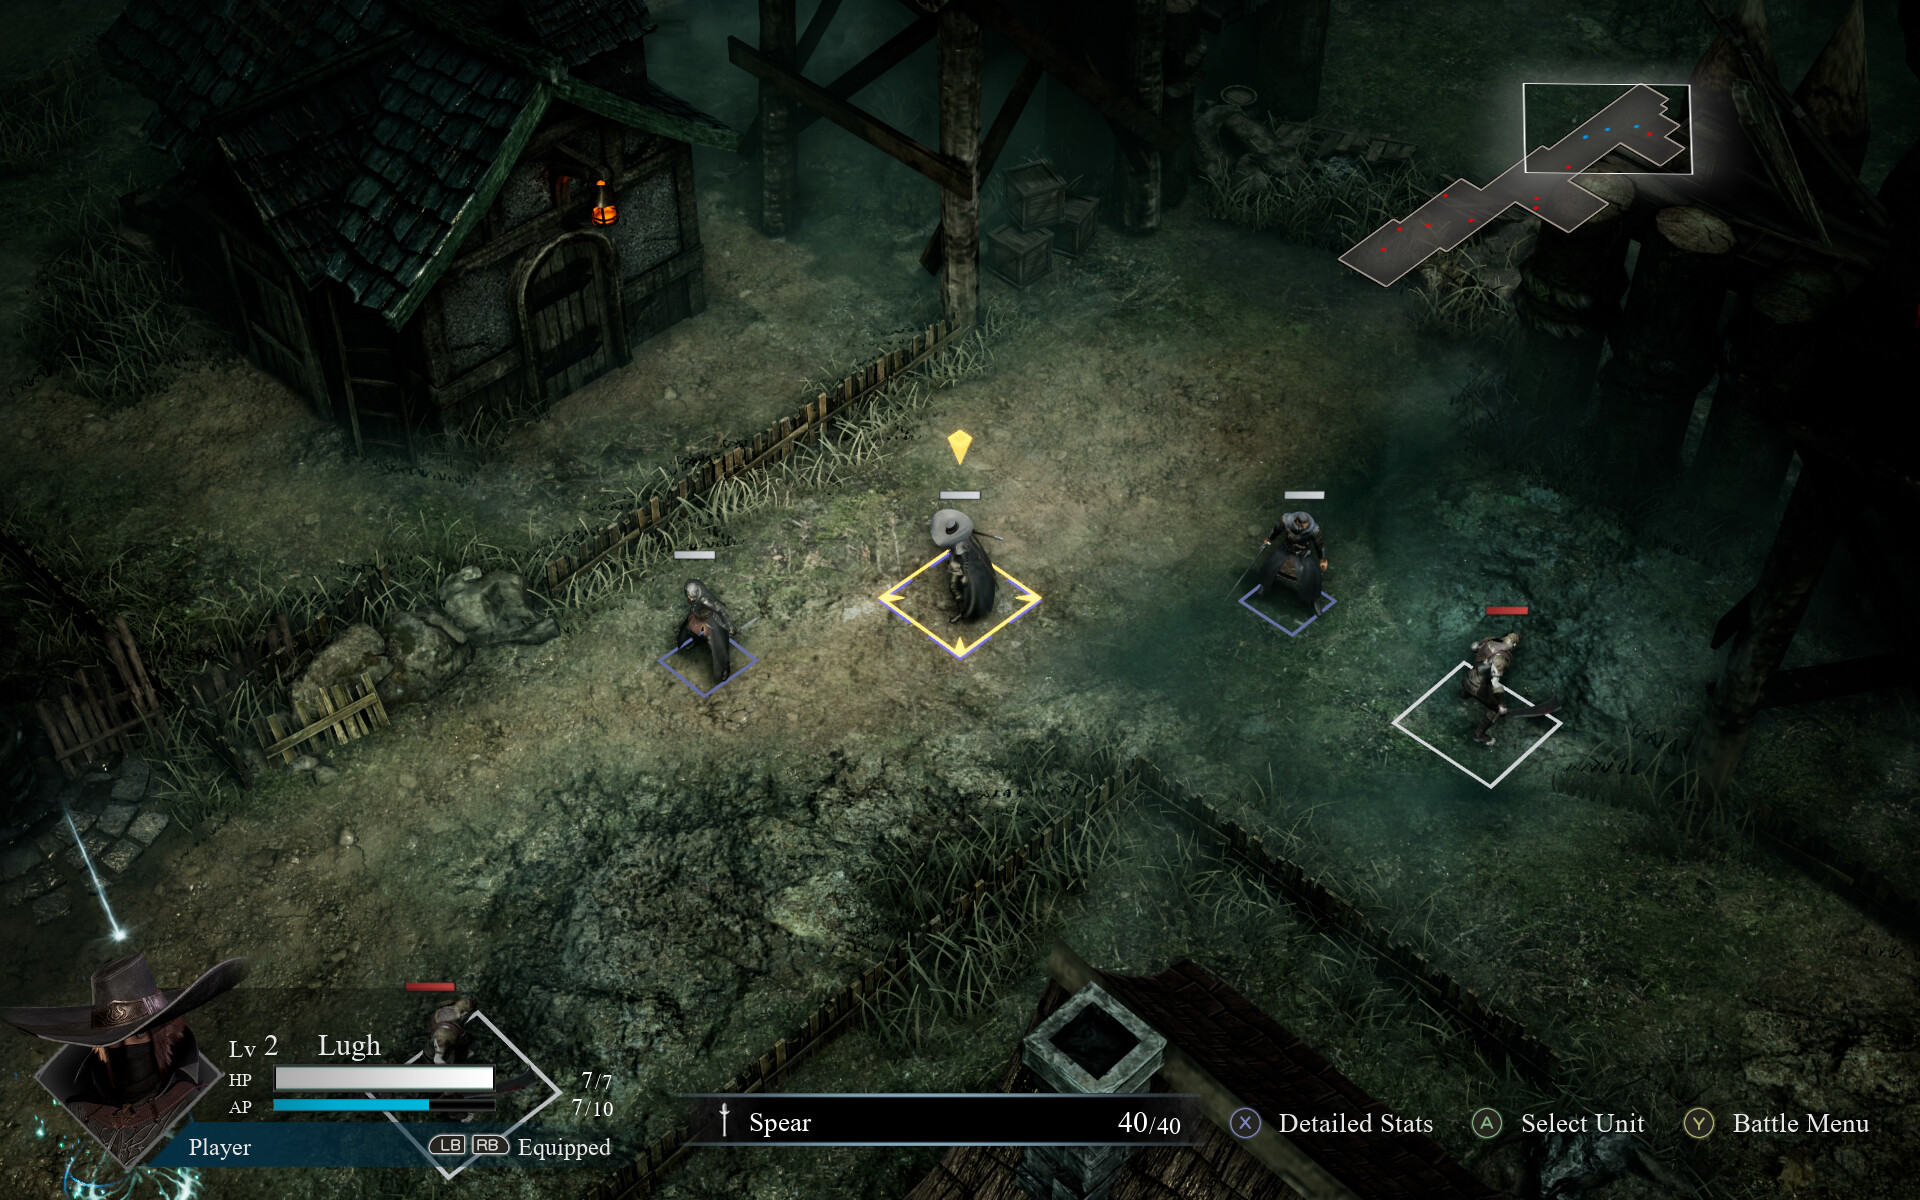 Binary Haze Interactive and Adglobe announce strategy RPG